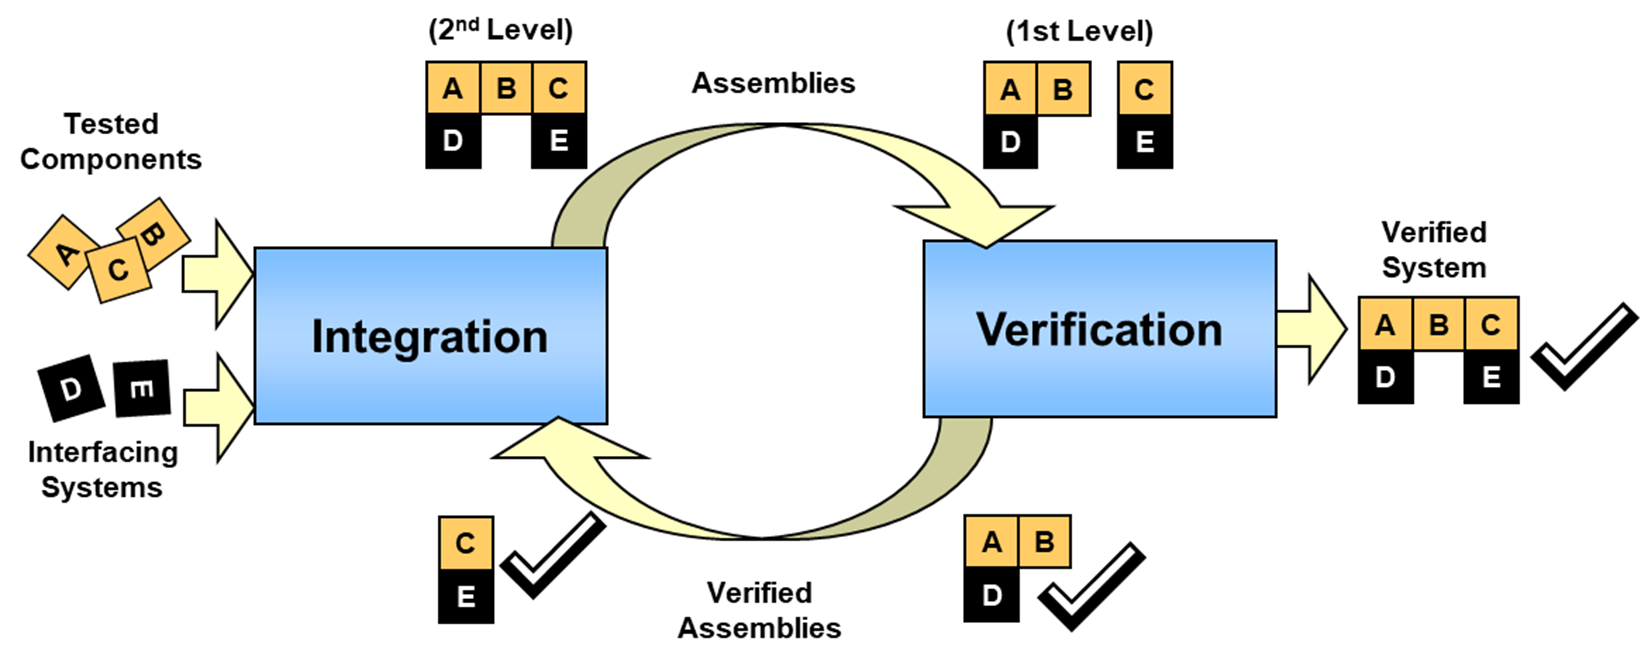 Figure explains the iterative nature of integration and verification steps, described in the previous paragraph.